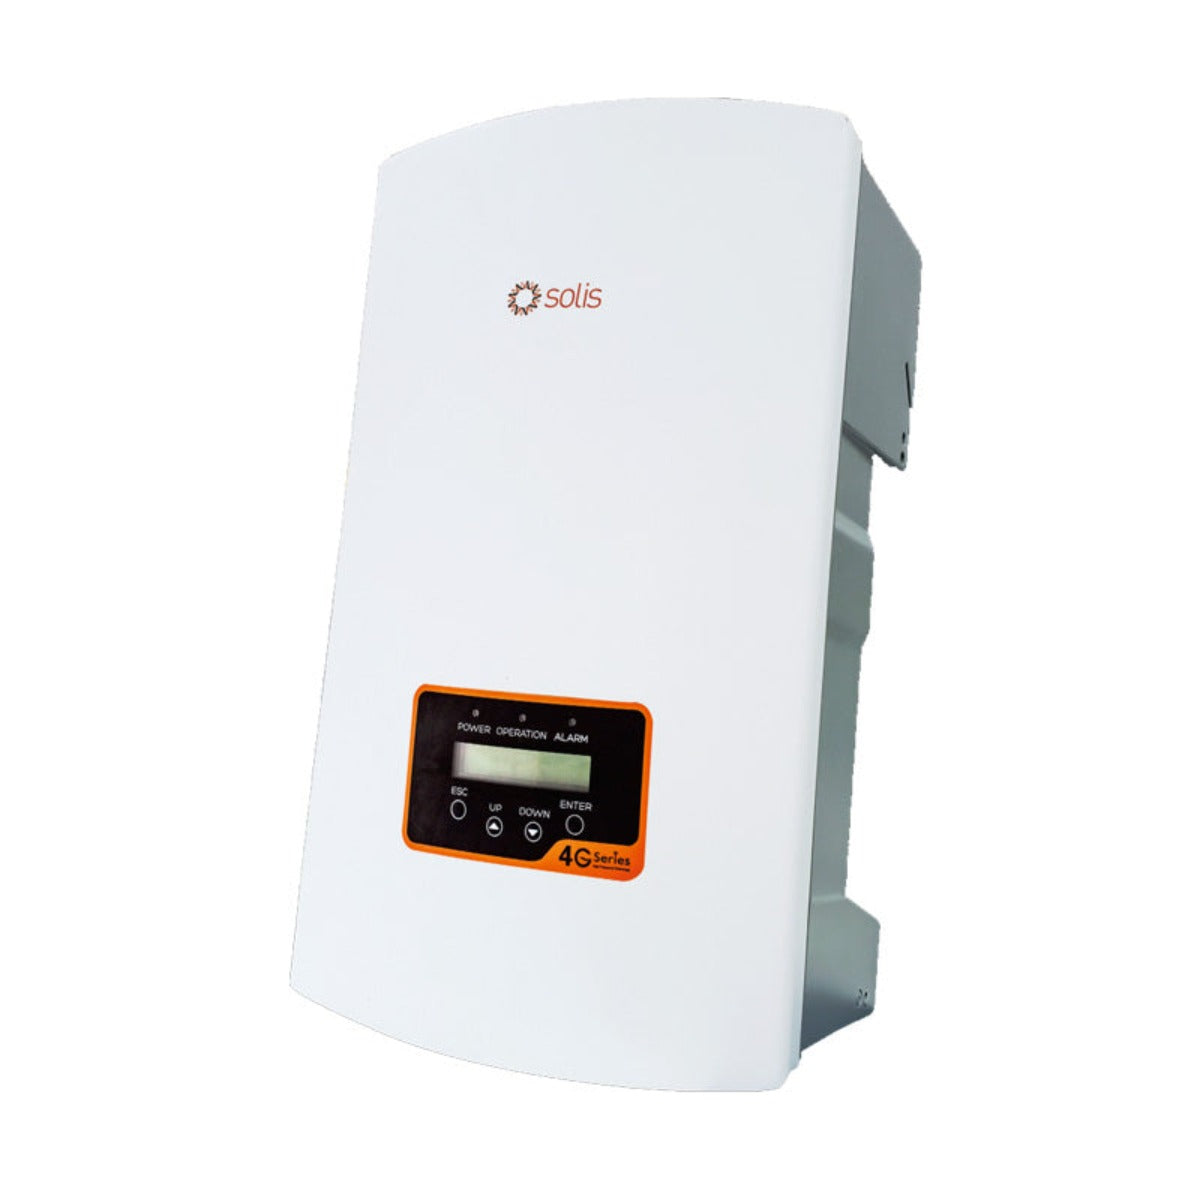 Solis 4G 12.0kW Dual MPPT 3-Phase Grid Tie Inverter - Sustainable.co.za